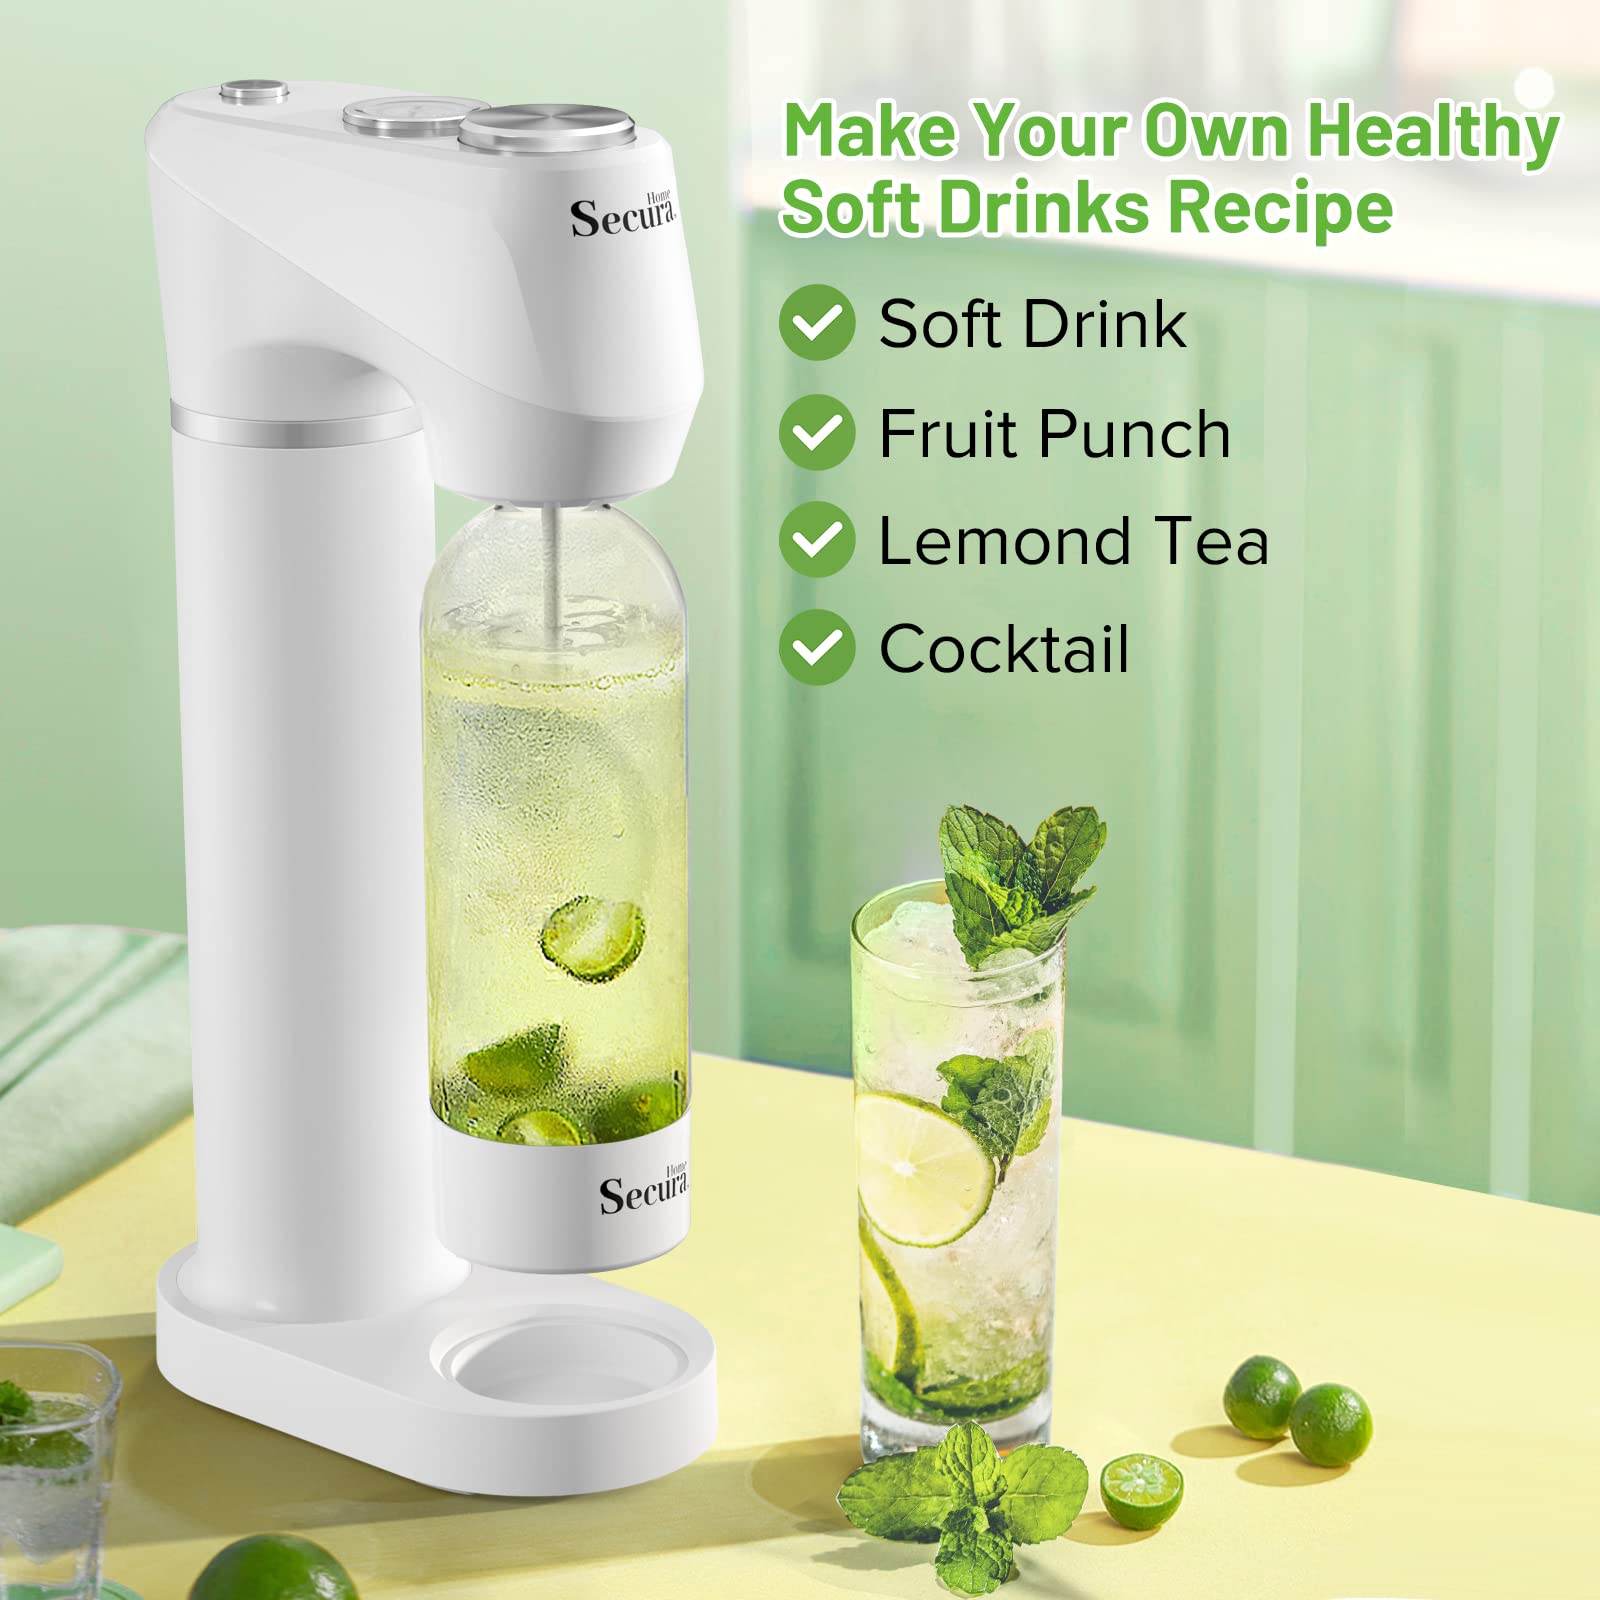 Secura Home Sparkling Water Machine, Cordless Soda Maker with Pressure Gauge, Quick & Customize Carbonation for Any Drink, with BPA Free PET Bottle, Compatible 60L CO2 Exchange Cylinder (NOT Included)